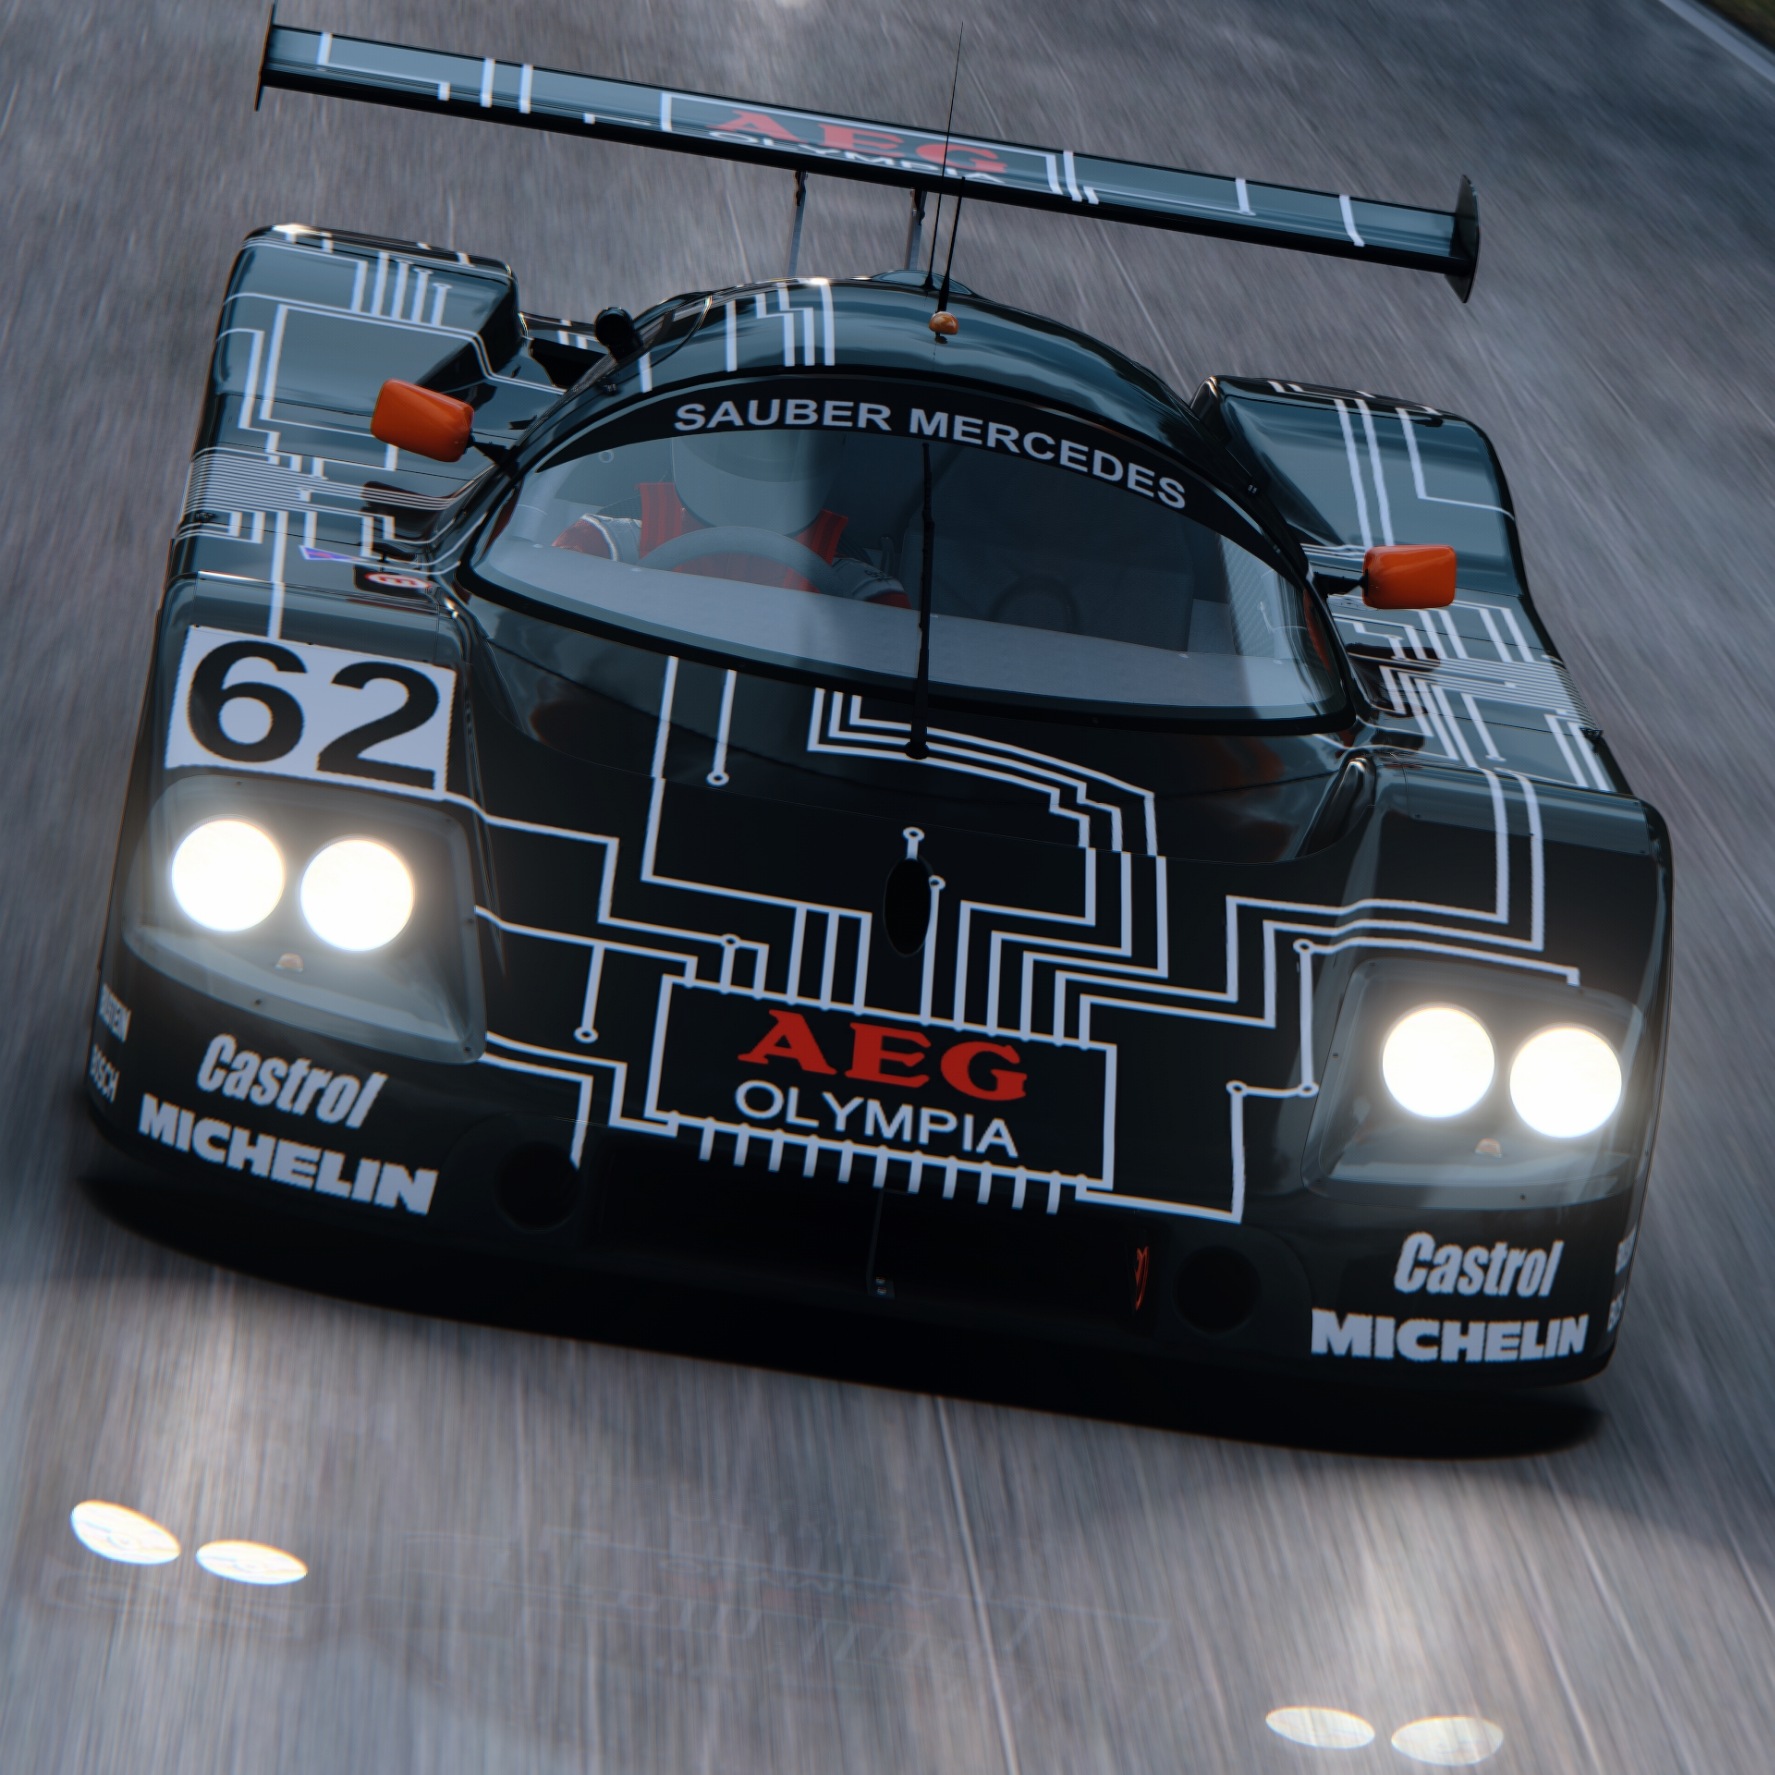 The Mercedes Benz Of the Group C in the Nürburgring by Gt33